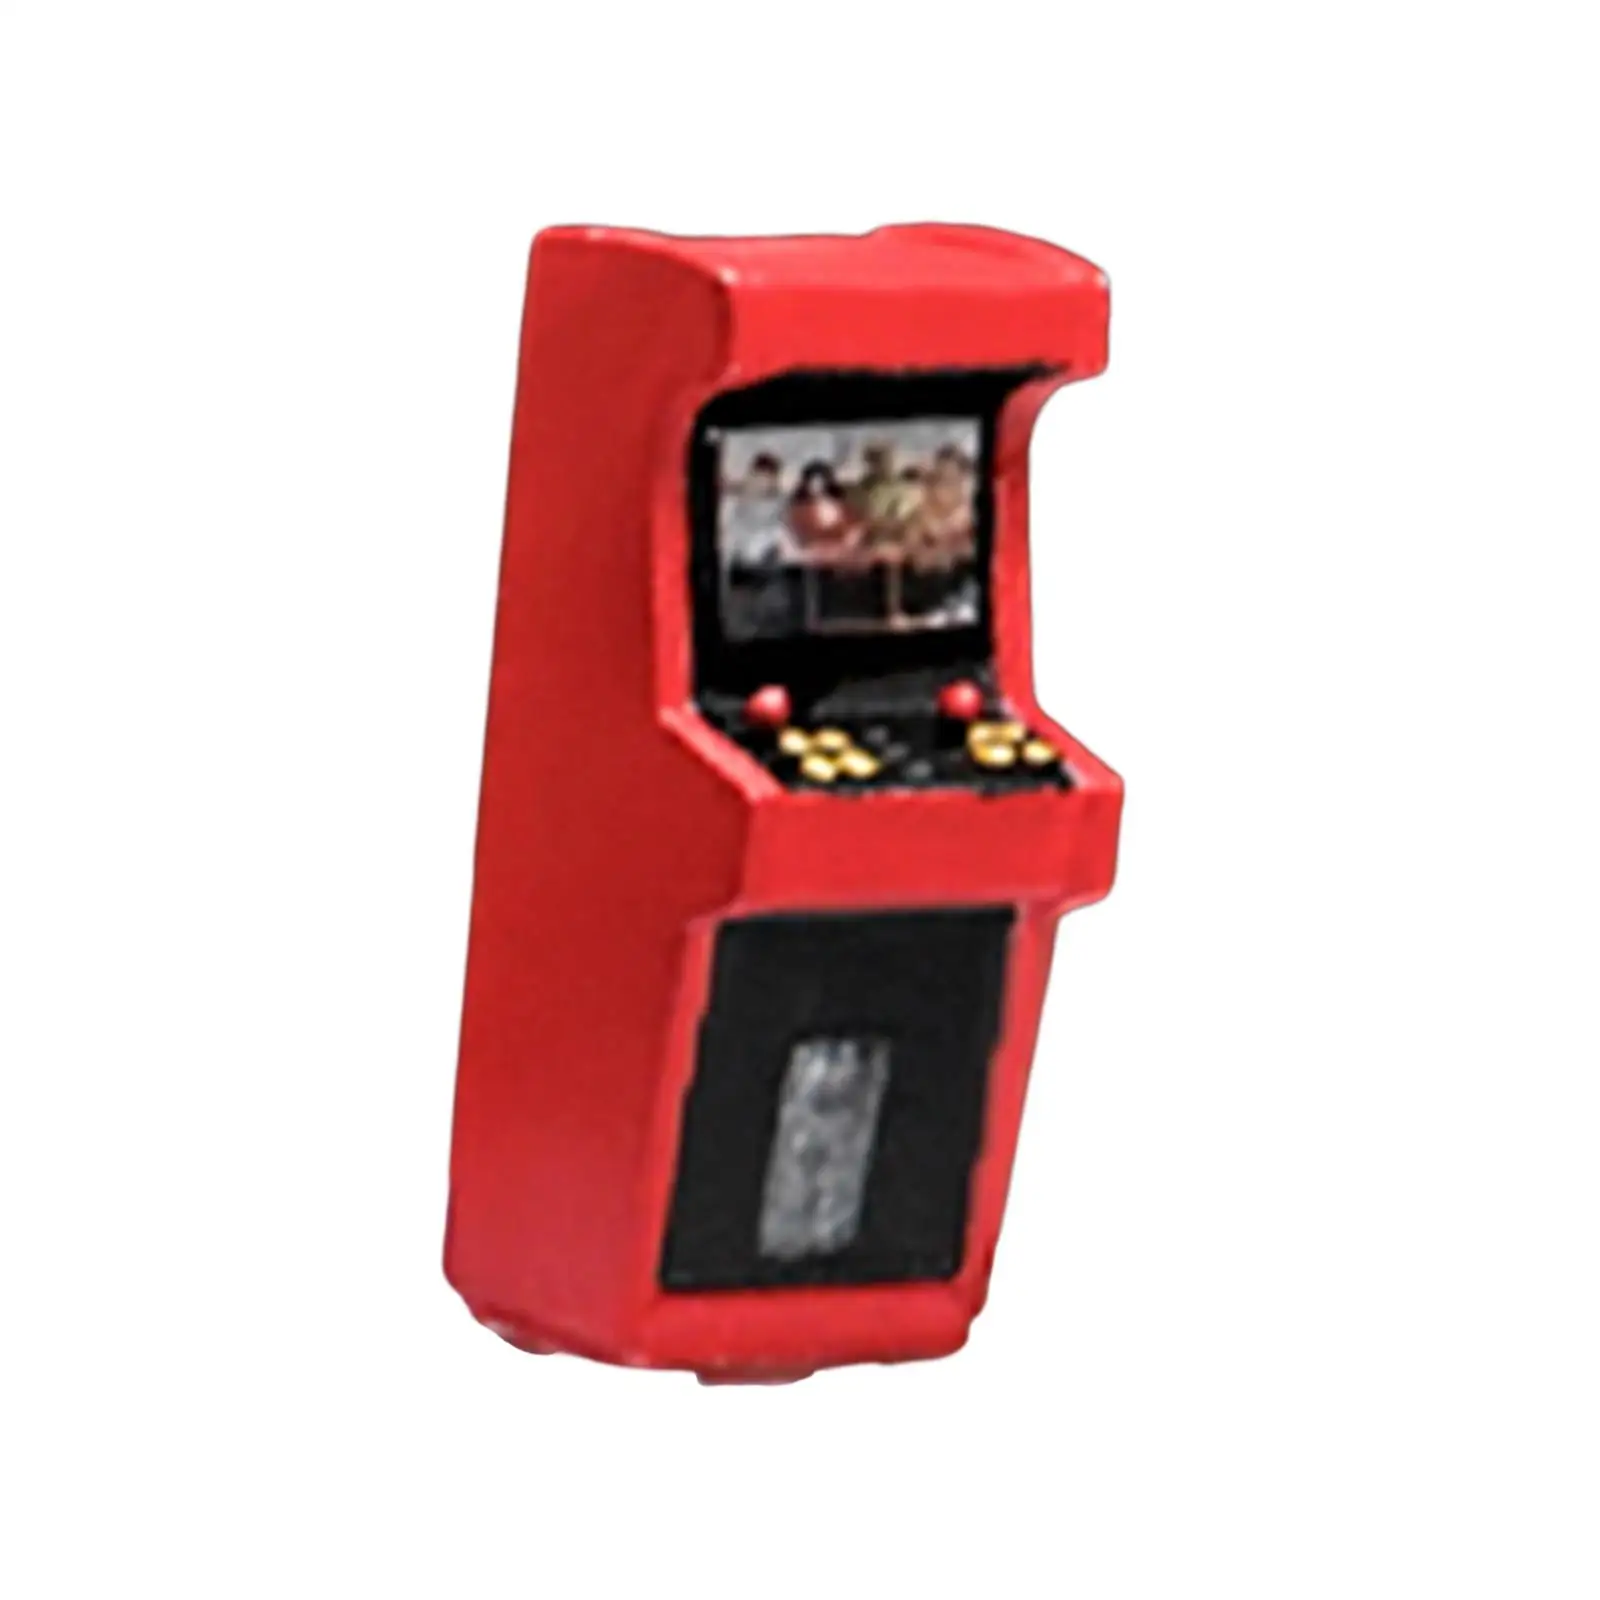 Retro Arcade Game Machine Model Accessory 1: 64 Handcrafted for Game Console